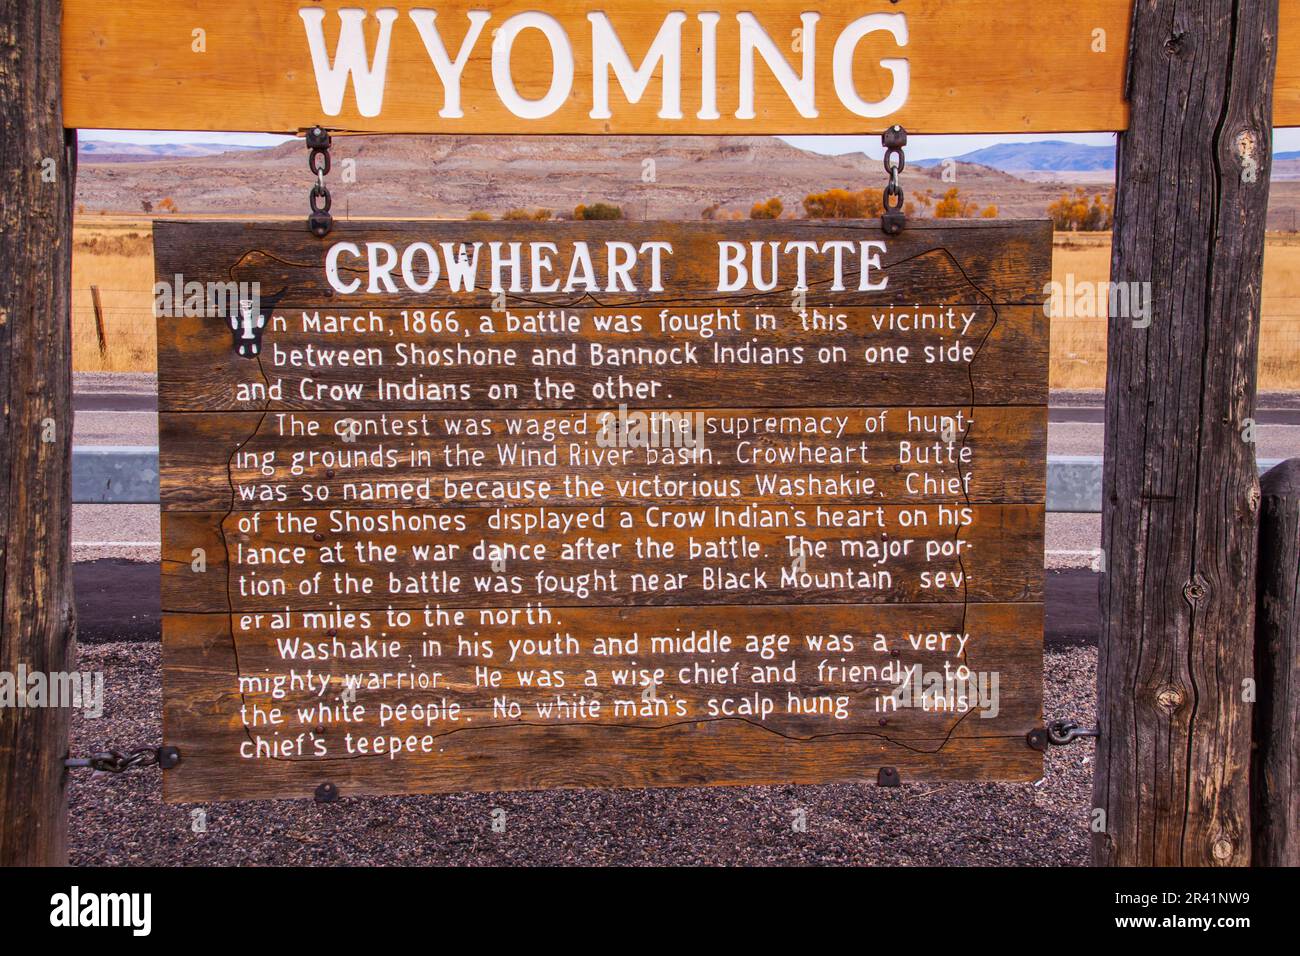 Crowheart Butte in Wyoming was the site of the Crowheart Butte Battle of 1866 between the Crow Indians and the Eastern Shoshone tribe. Stock Photo